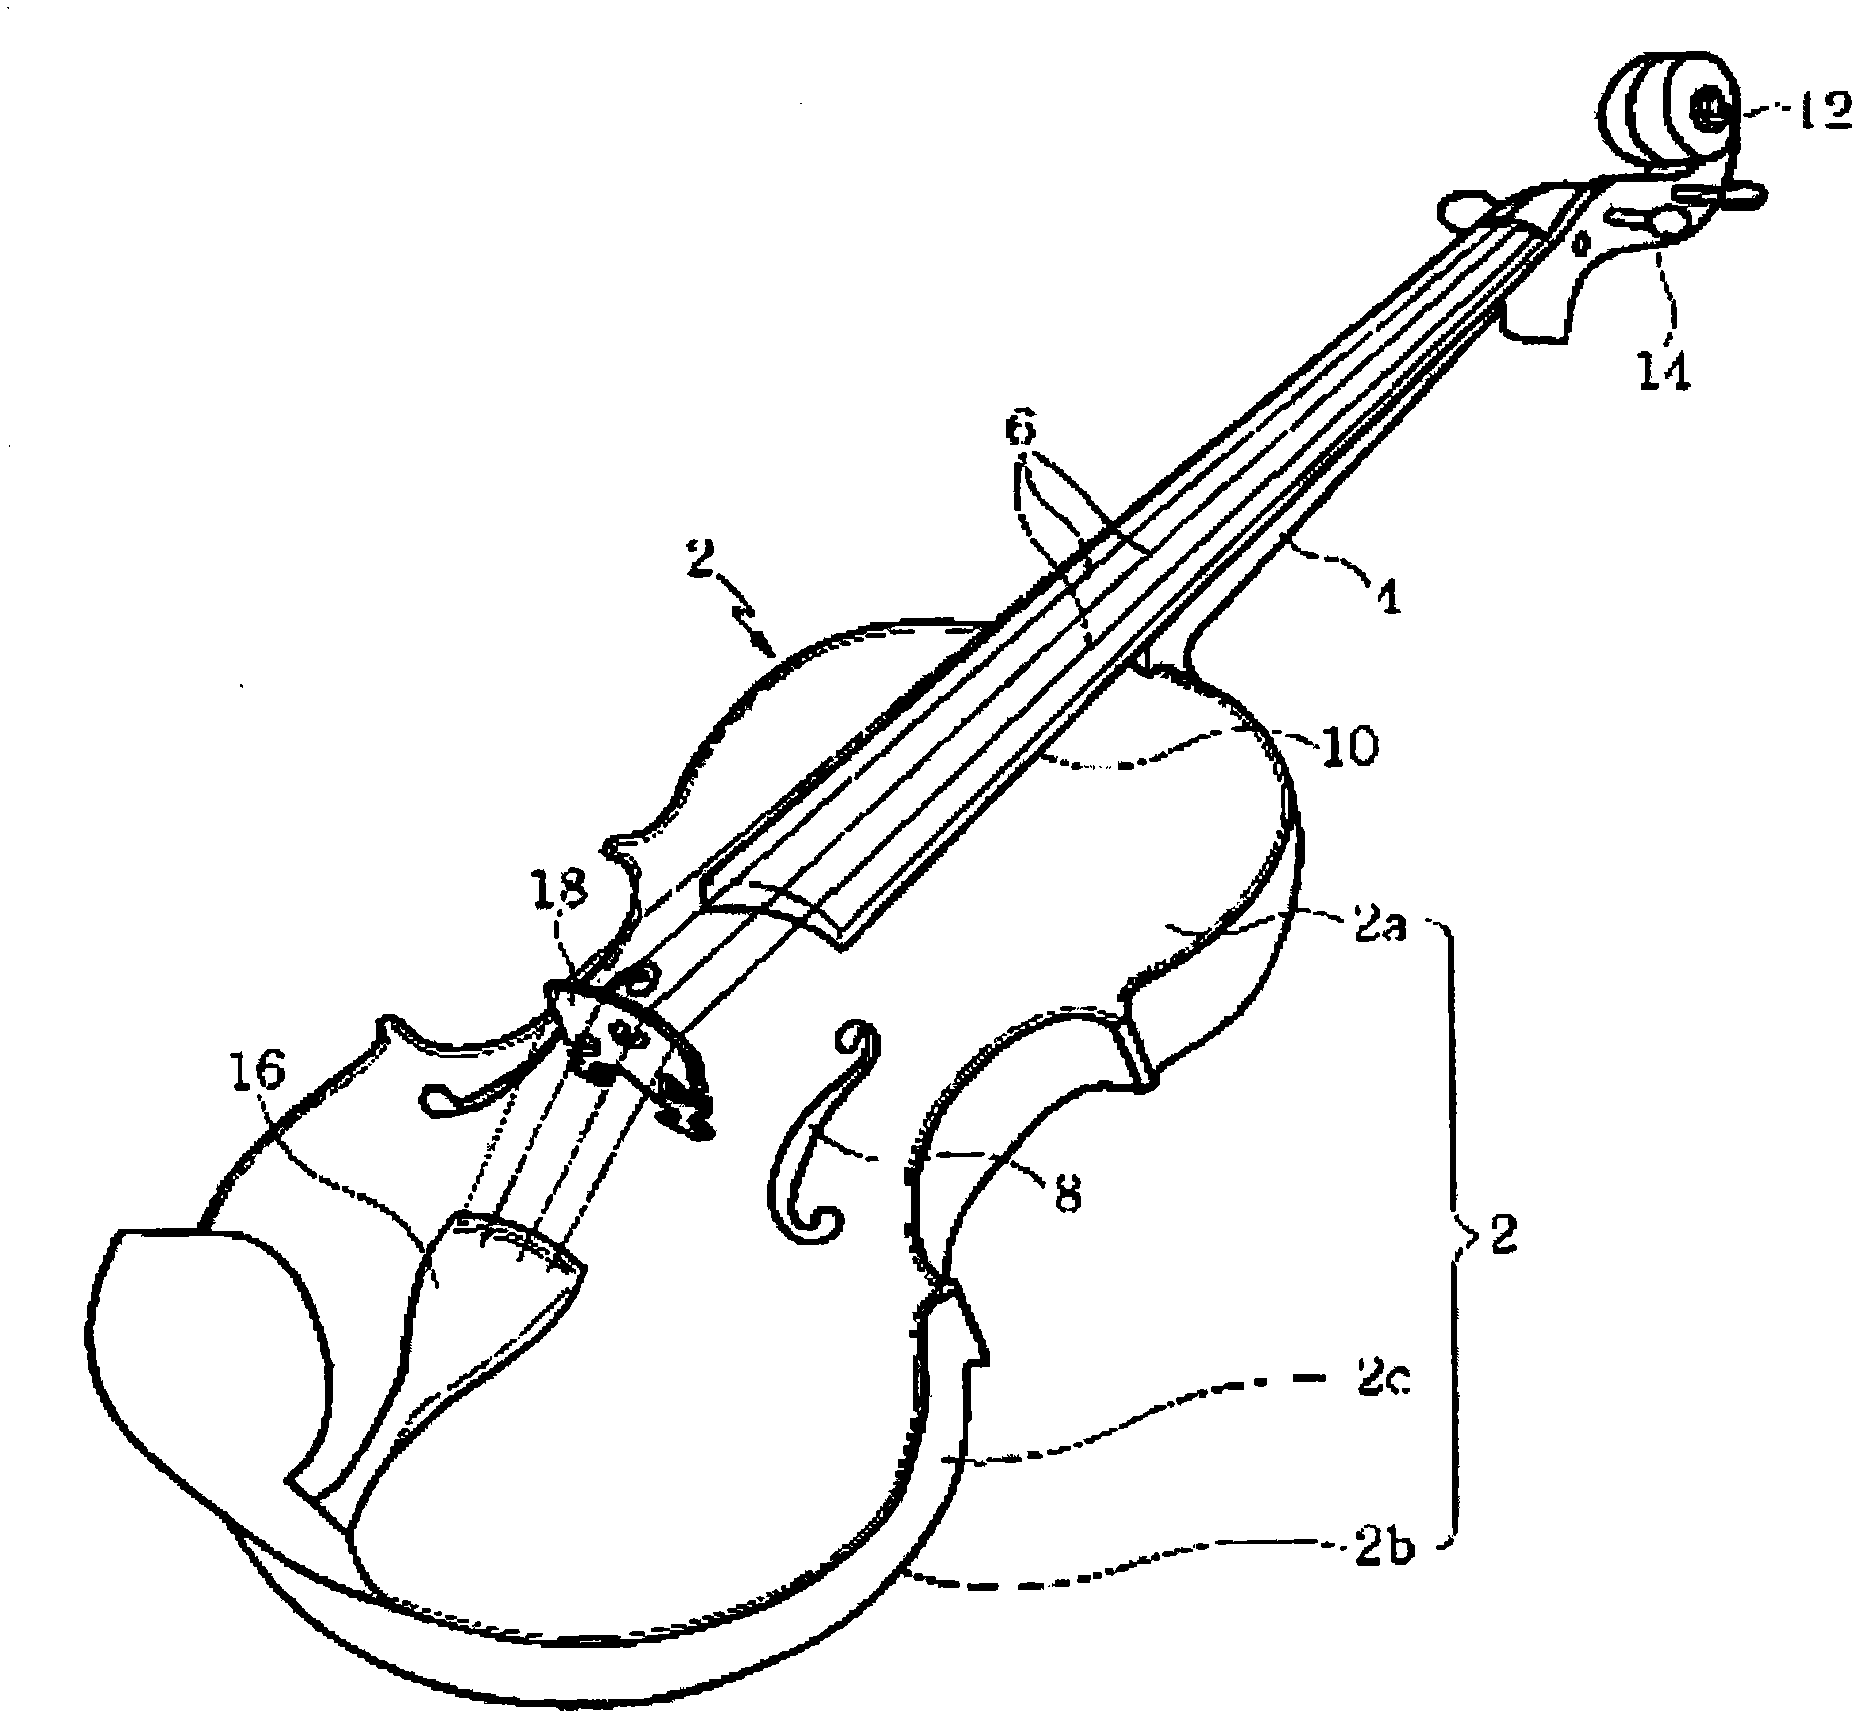 String instrument in violin family, capable of versatile use as acoustic or electric instrument